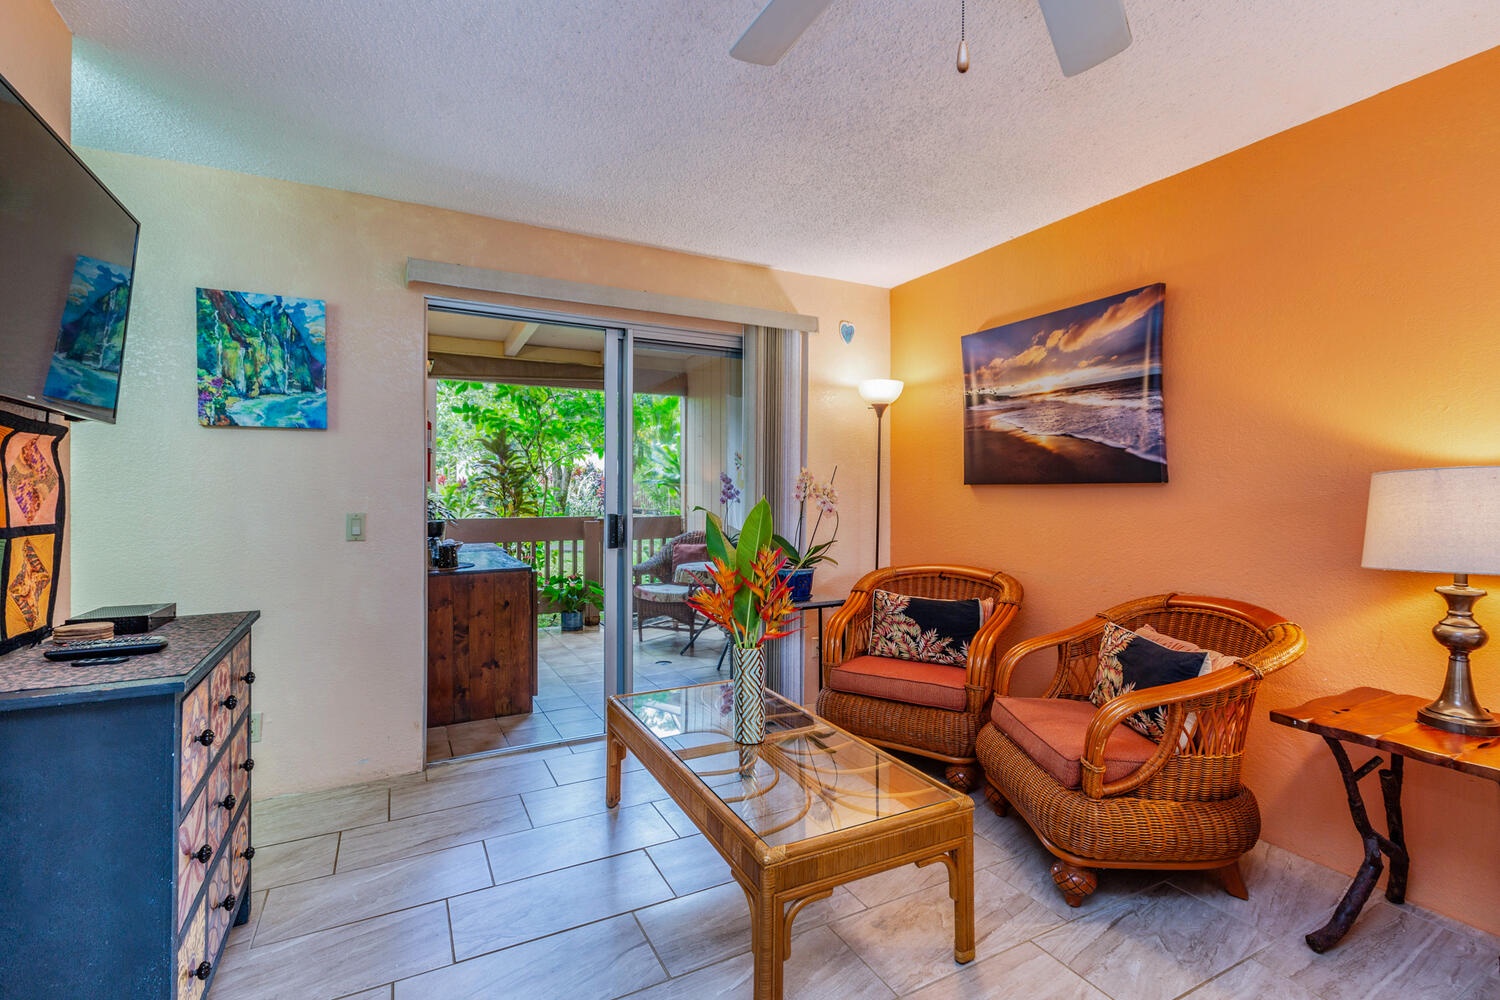 Princeville Vacation Rentals, Hideaway Haven Suite - Indulge in the comfort of a spacious and elegantly appointed suite, designed for ultimate relaxation and serenity.